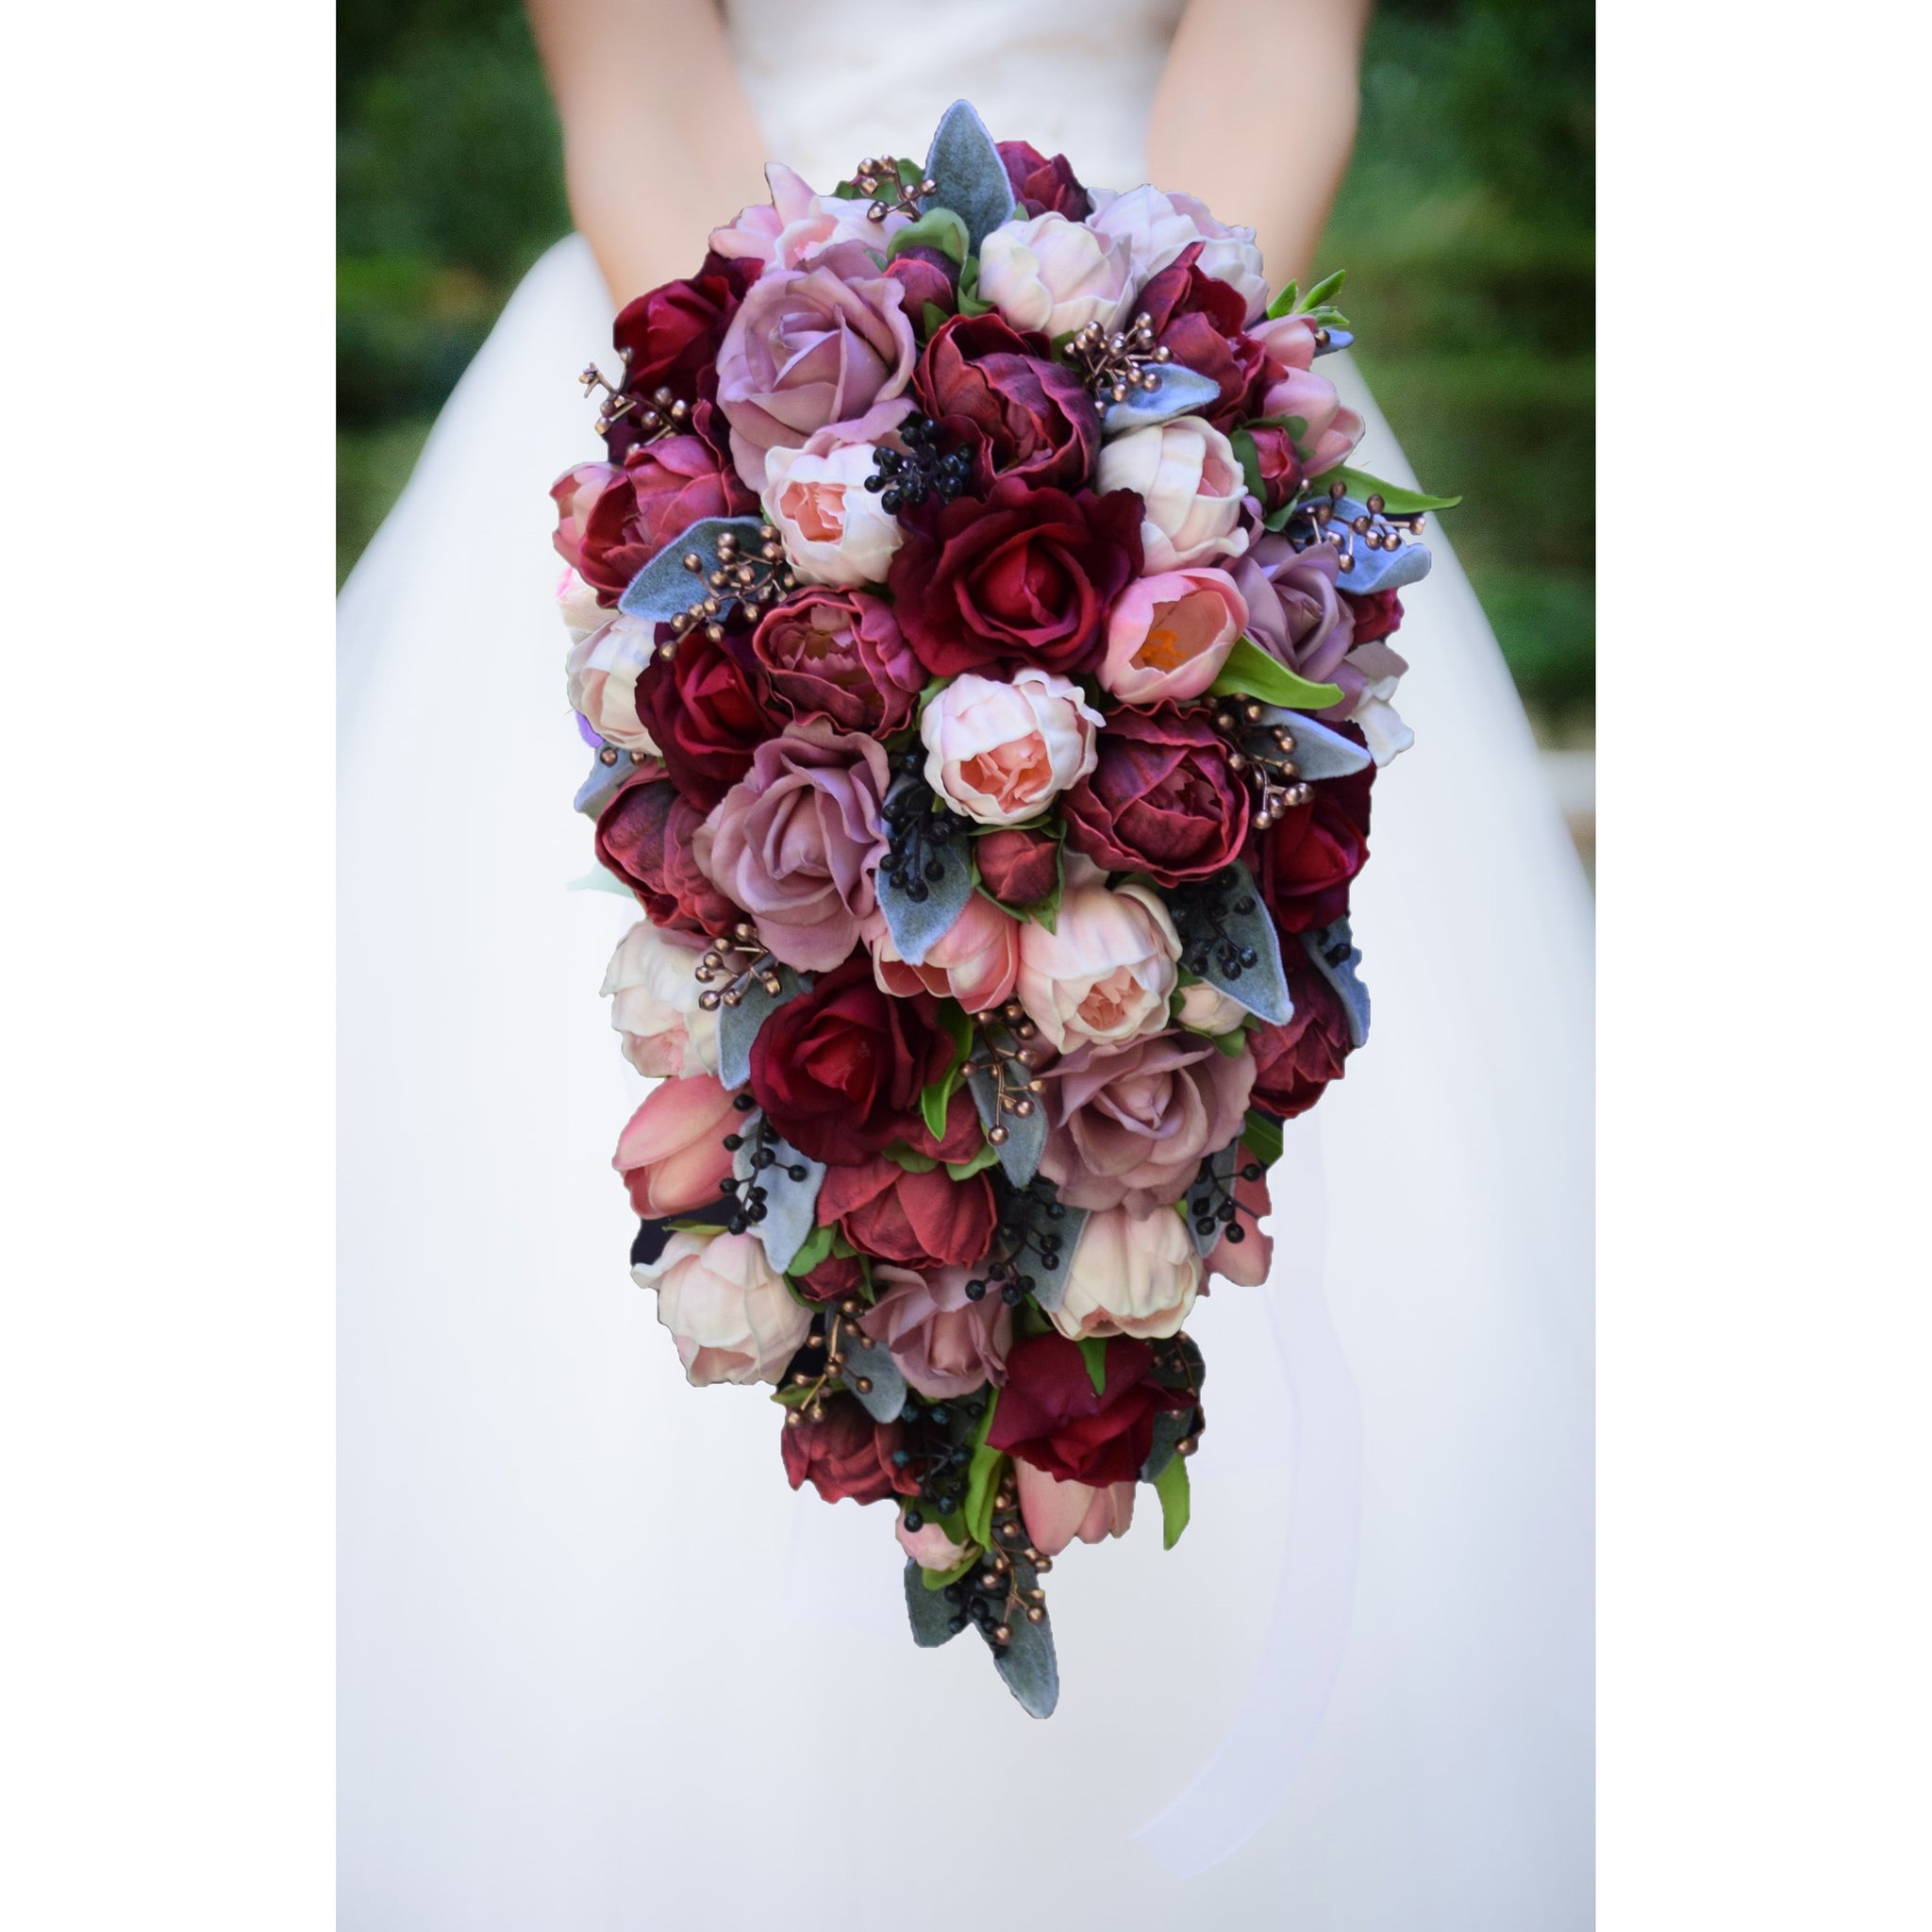 Cascade Bridal Bouquet Burgundy Blush Navy Dusty Rose Gold - Roses Peonies Tulips Berries - Add Groom Boutonniere Bridesmaid Bouquet & More!